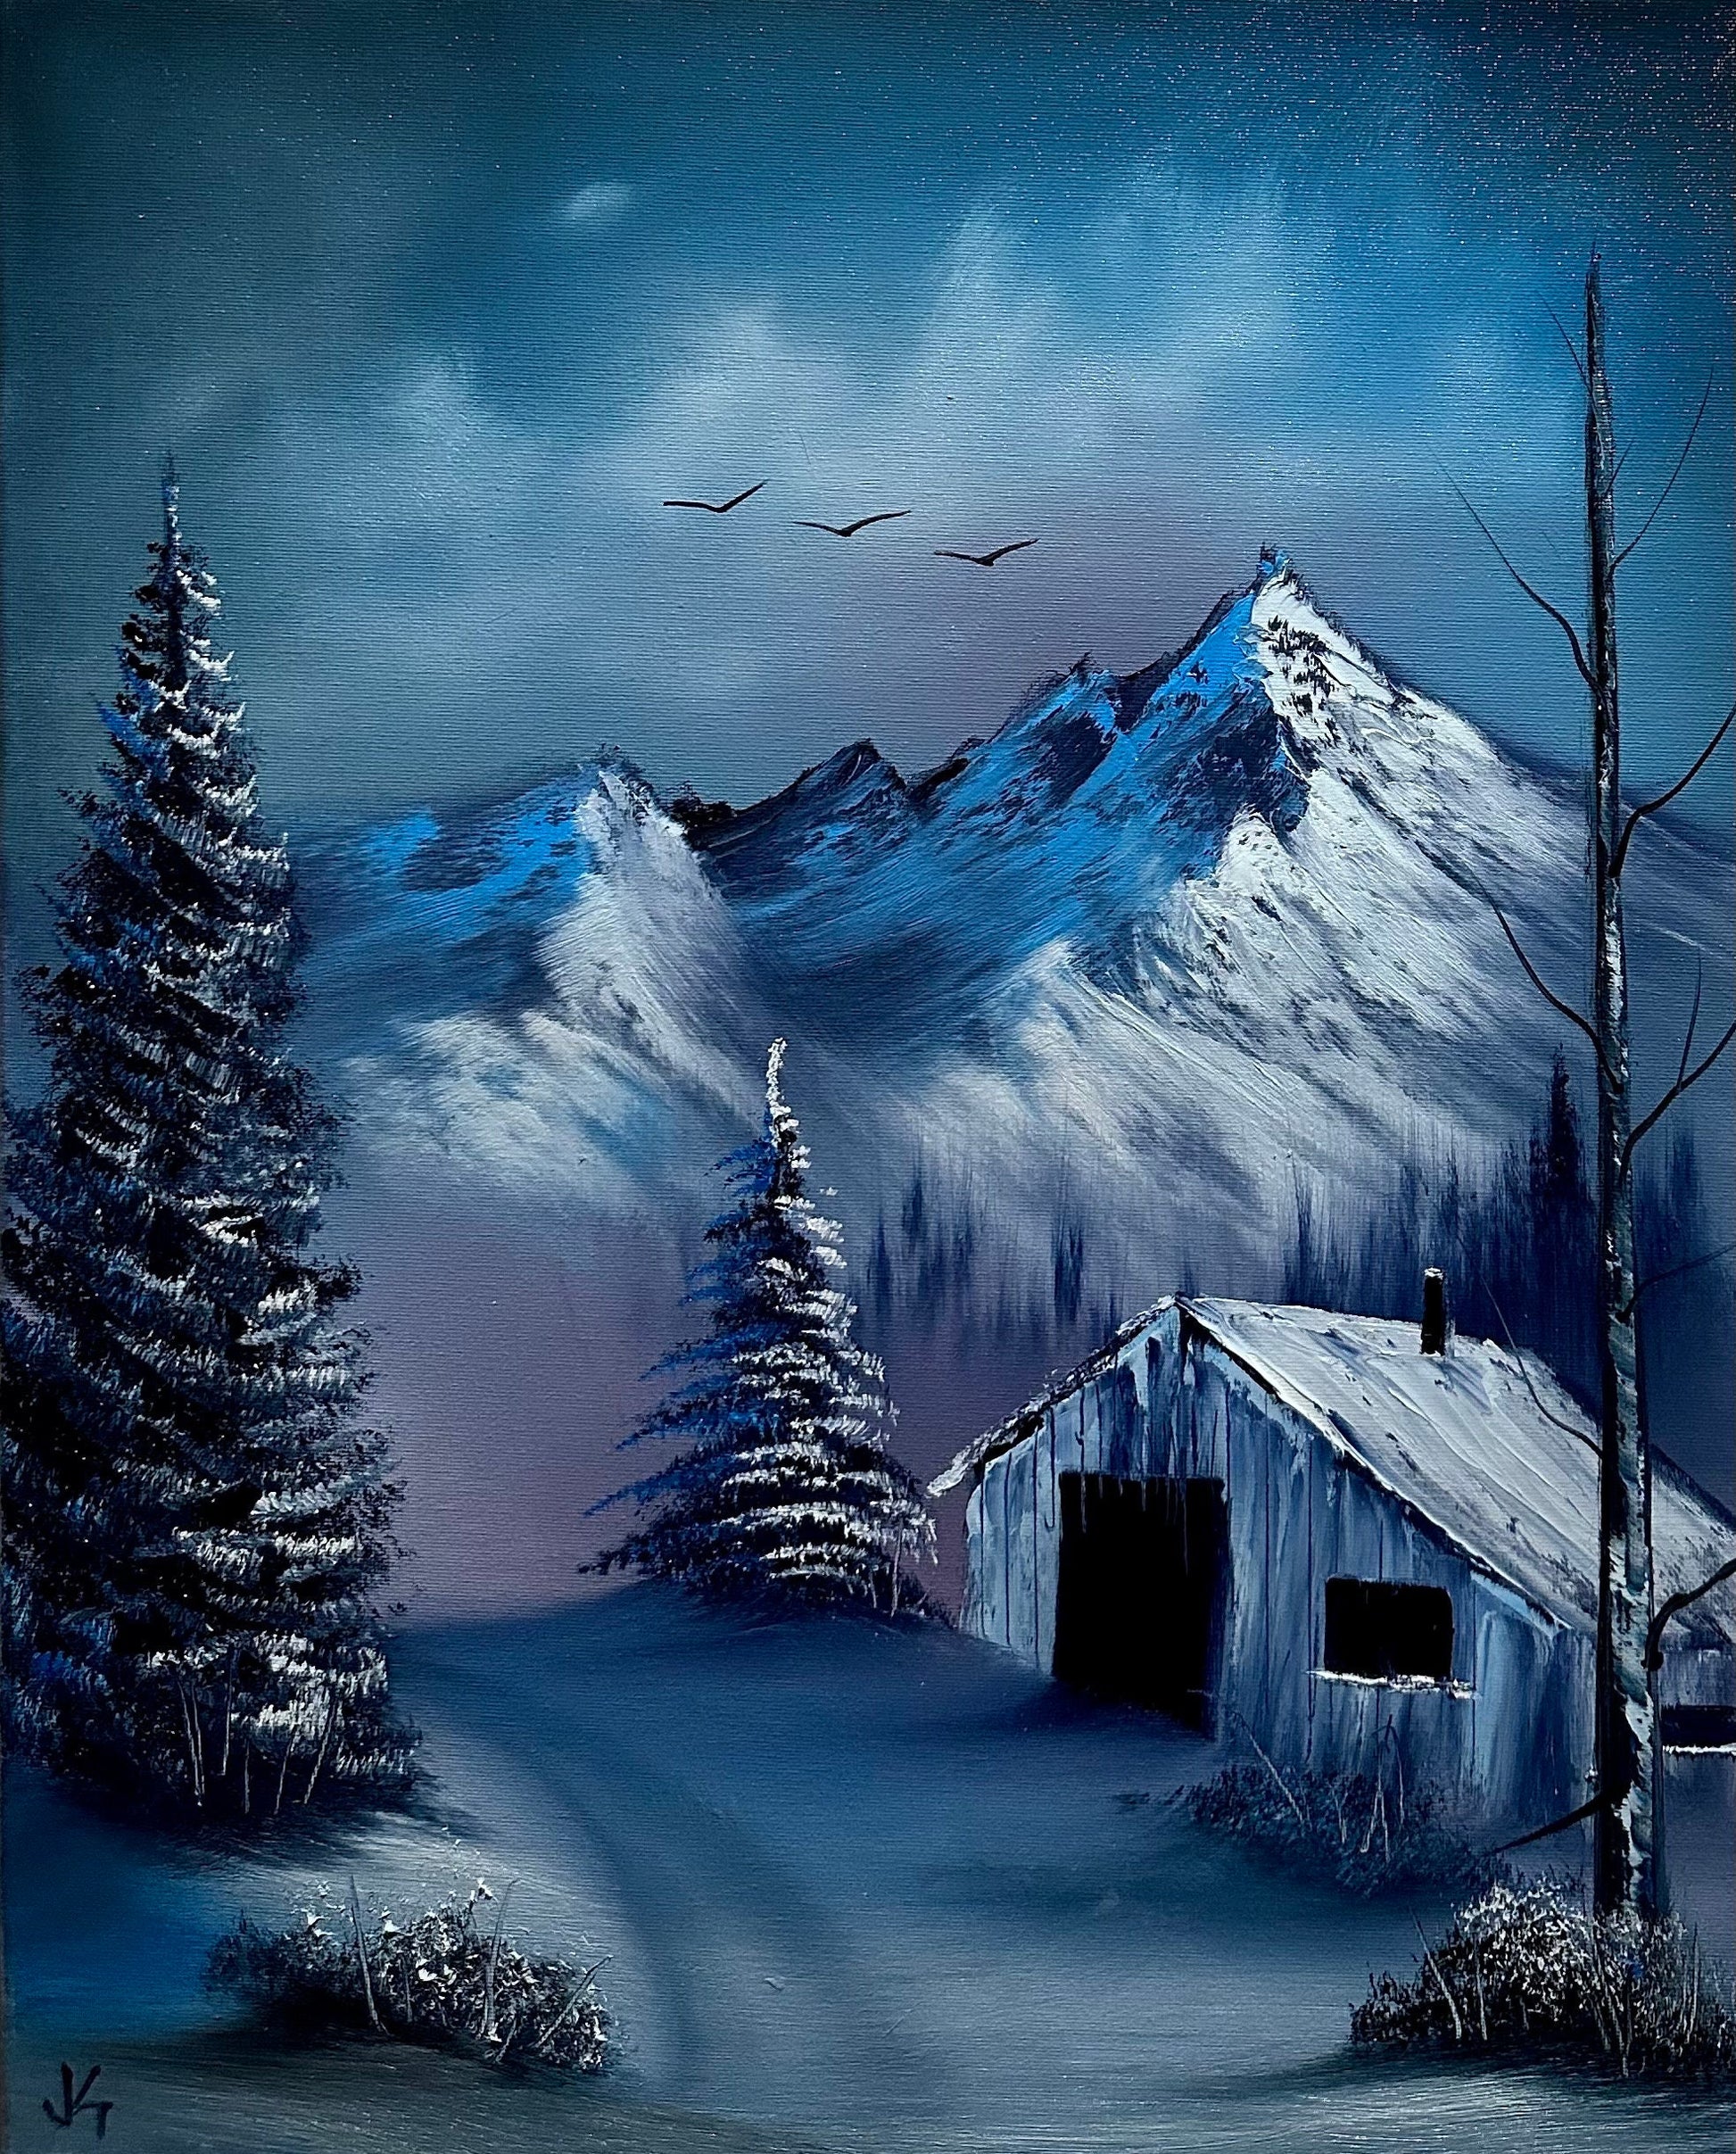 Painting 996 - 16x20" Canvas - Winter Landscape painted Live on TikTok on 10/29/23 by PaintWithJosh